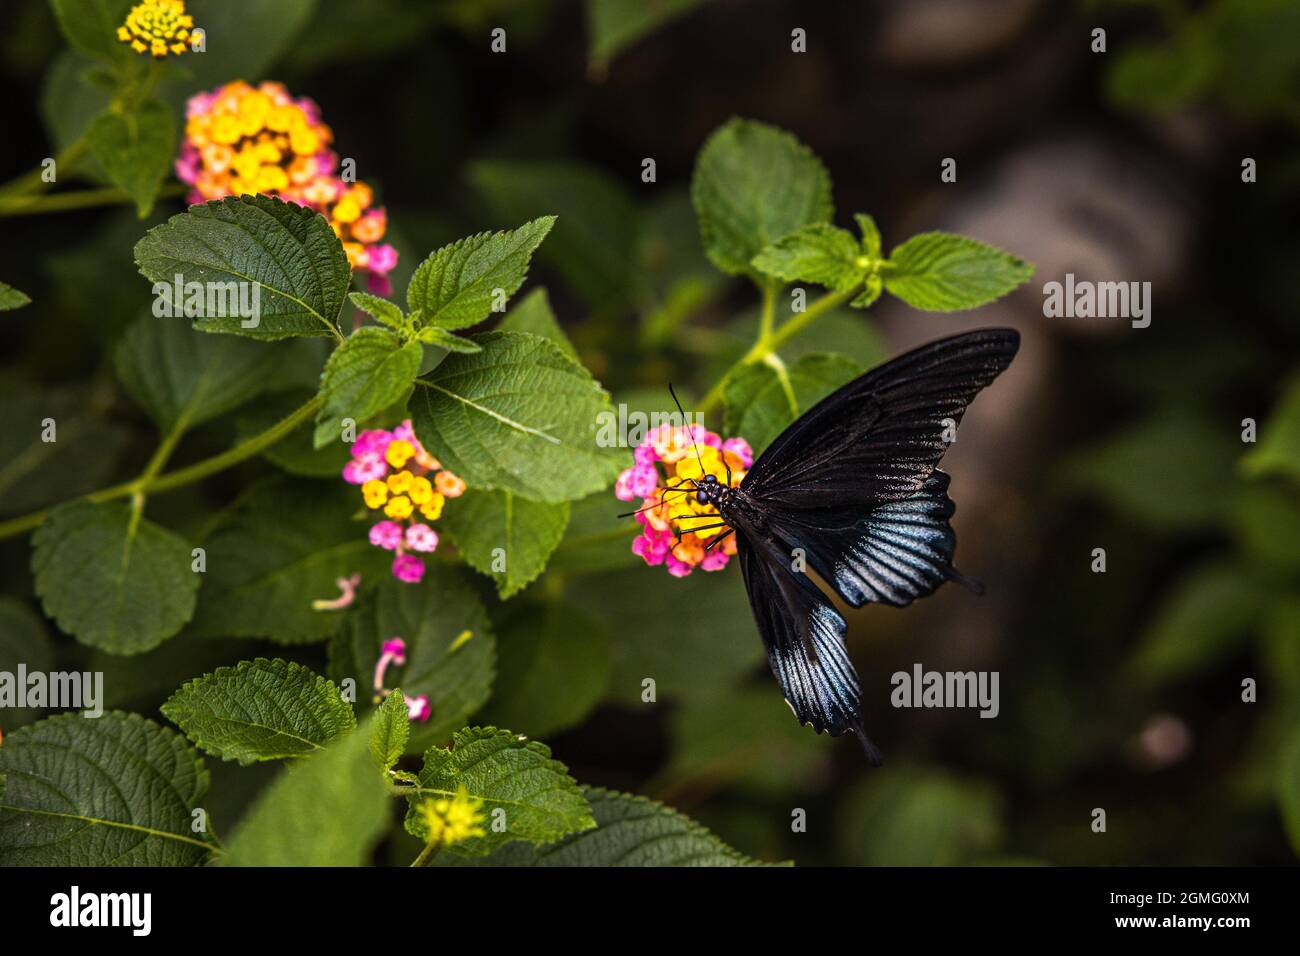 Black-Tipped Diadem Butterfly Stock Photo